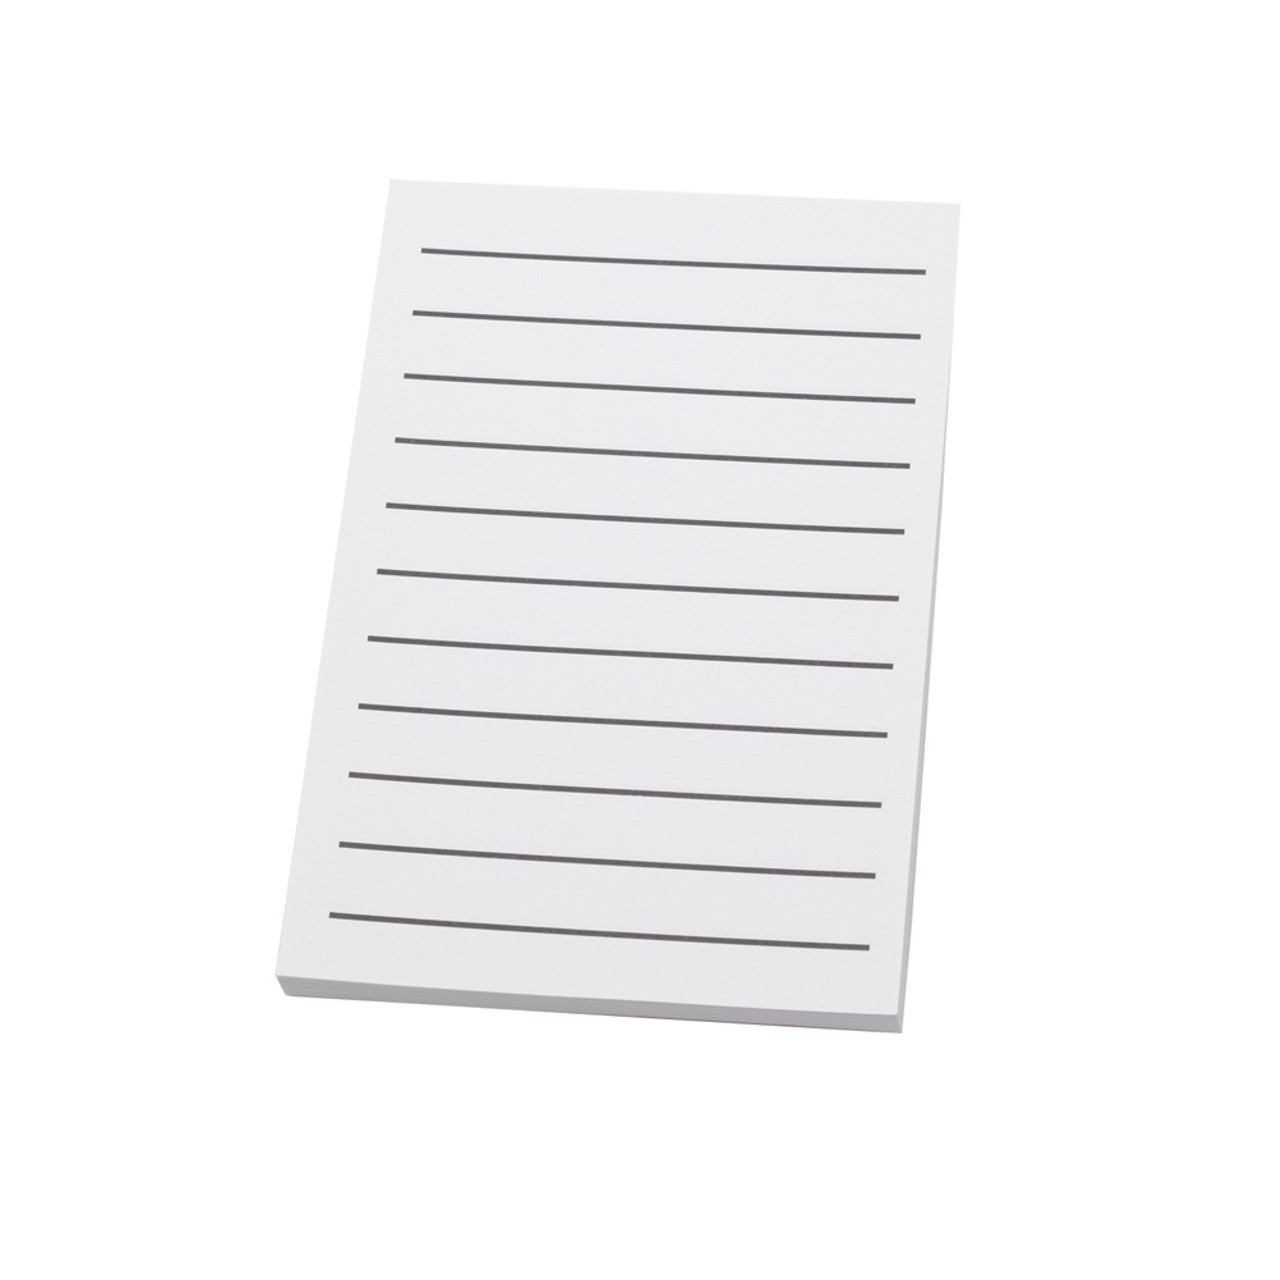 This sticky bold line notepad is similar to our Bold Line Paper (product number BLP100). The lines will help low vision individuals when writing notes. The underside of each page has a sticky area for posting notes on virtually any surface. 50 sticky notes per gummed pad.